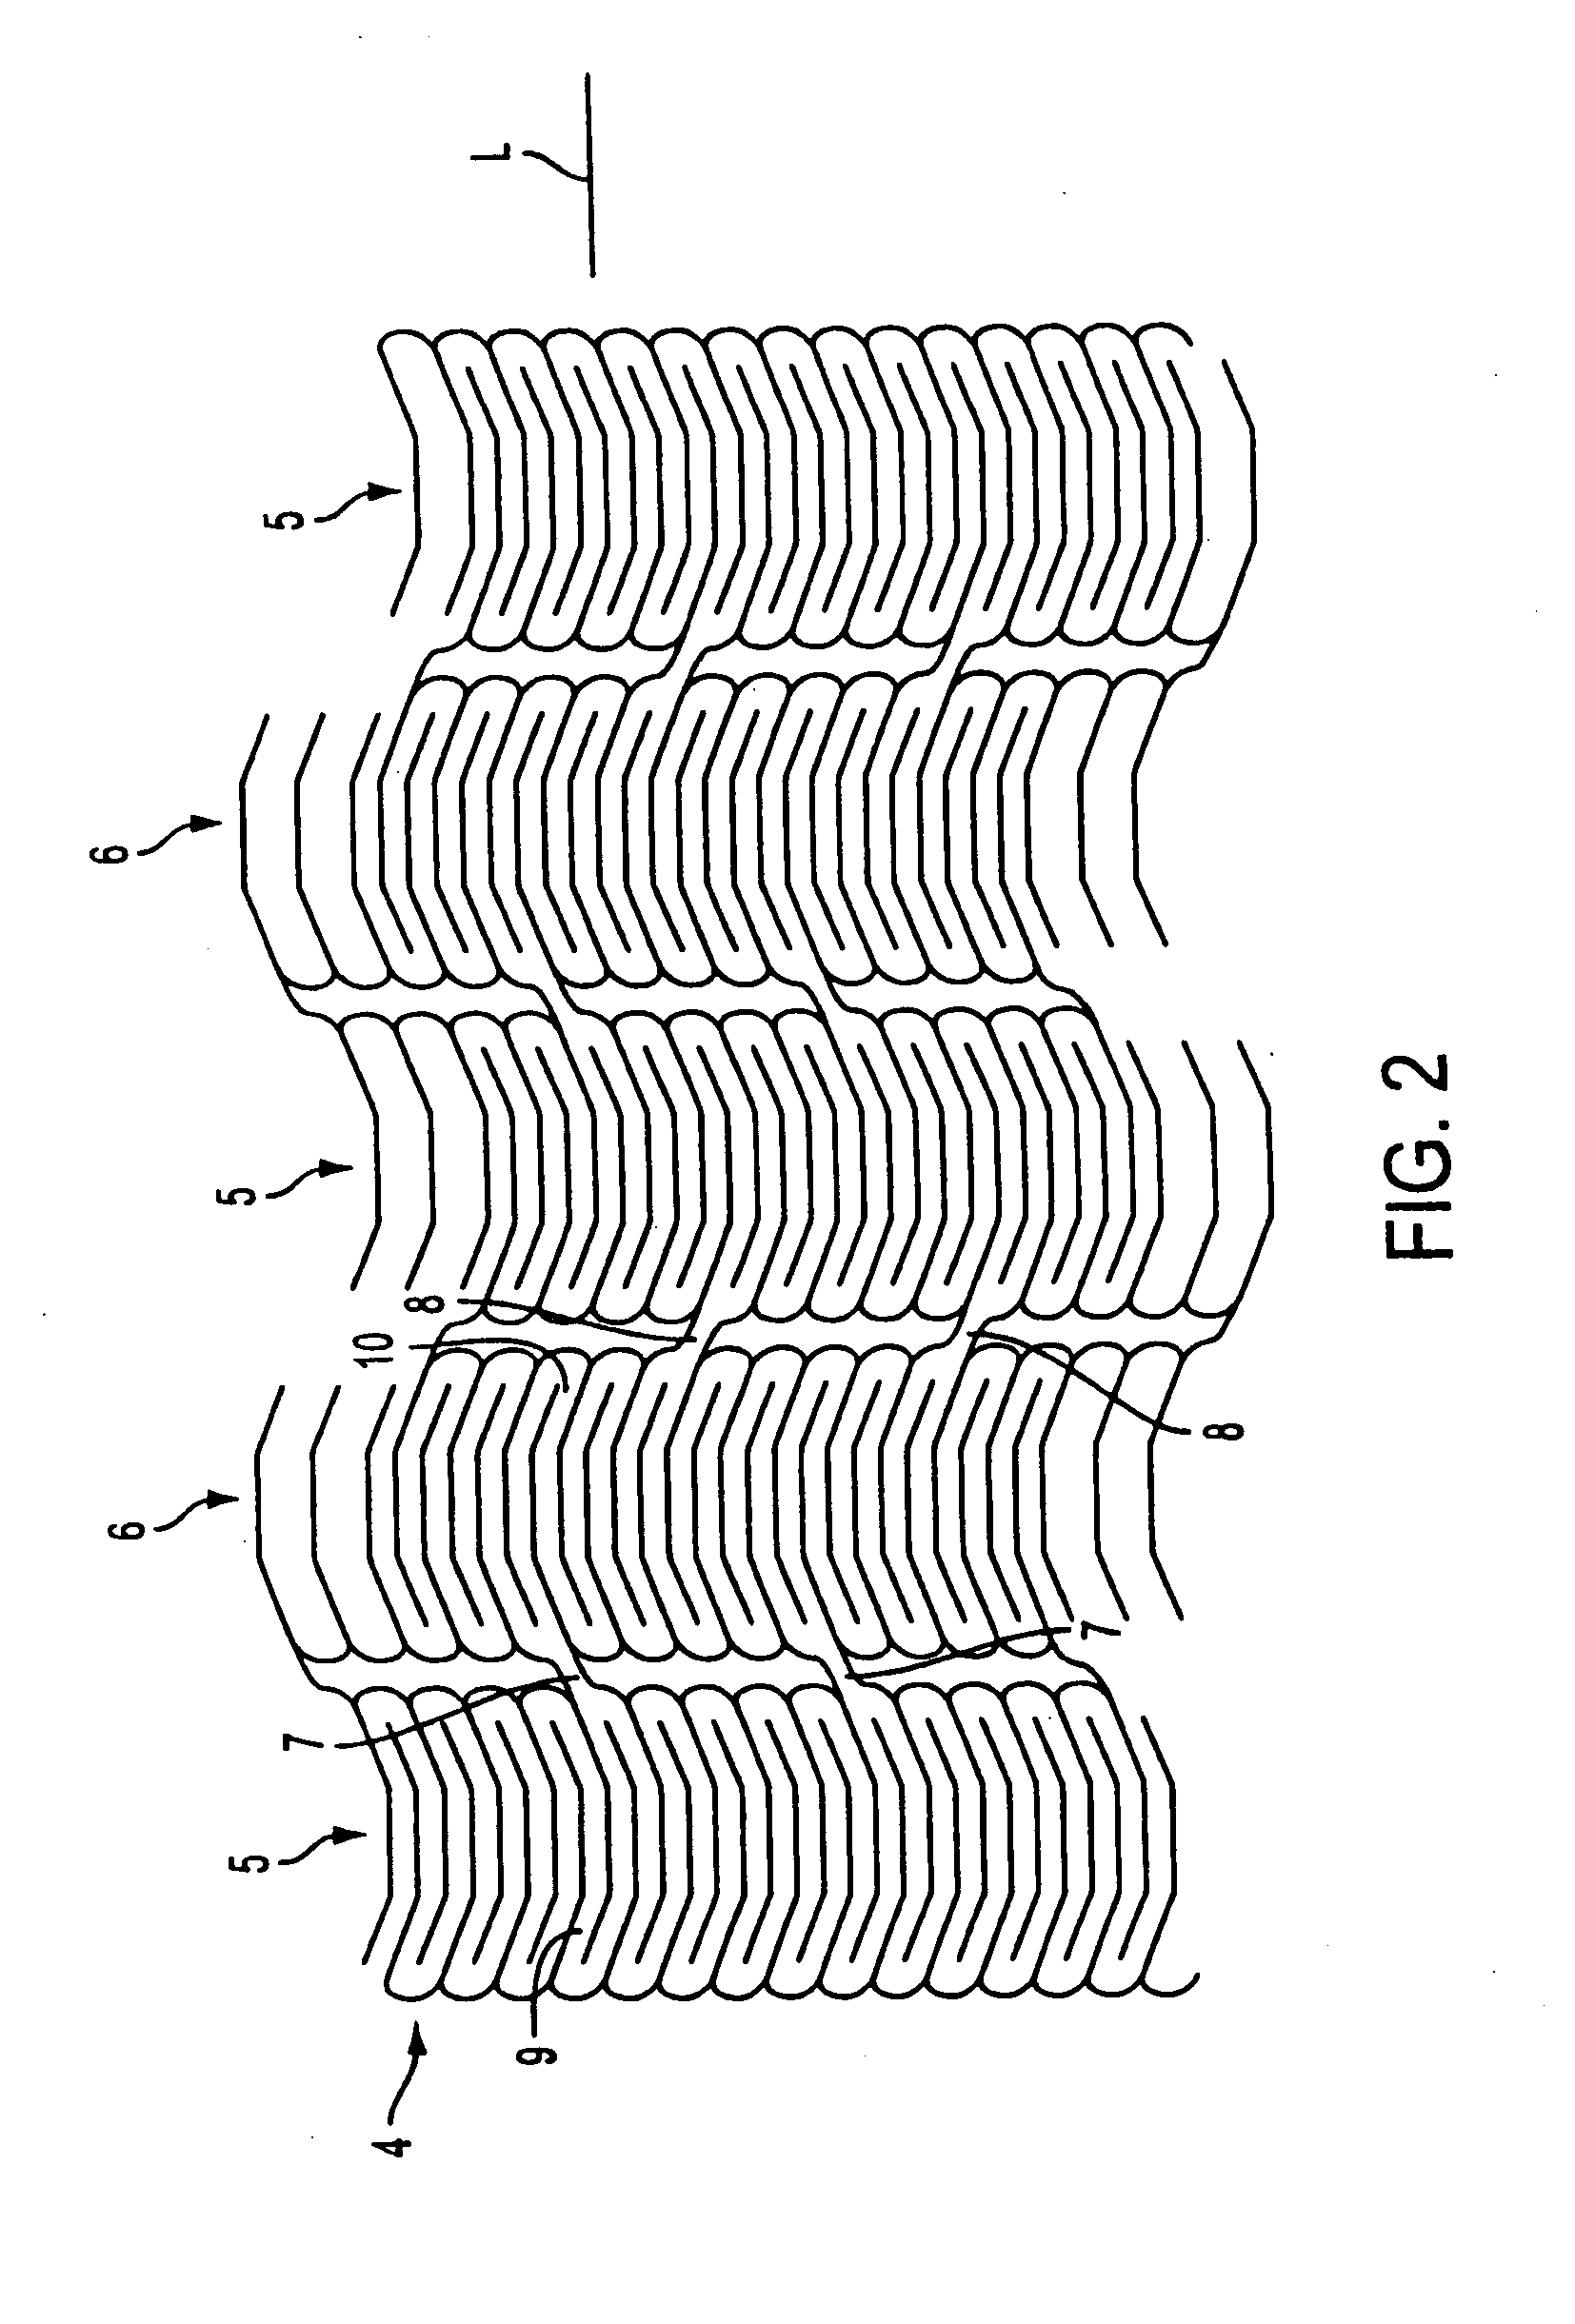 Methods and apparatus for stenting comprising enhanced embolic protections coupled with improved protections against restenosis and trombus formation